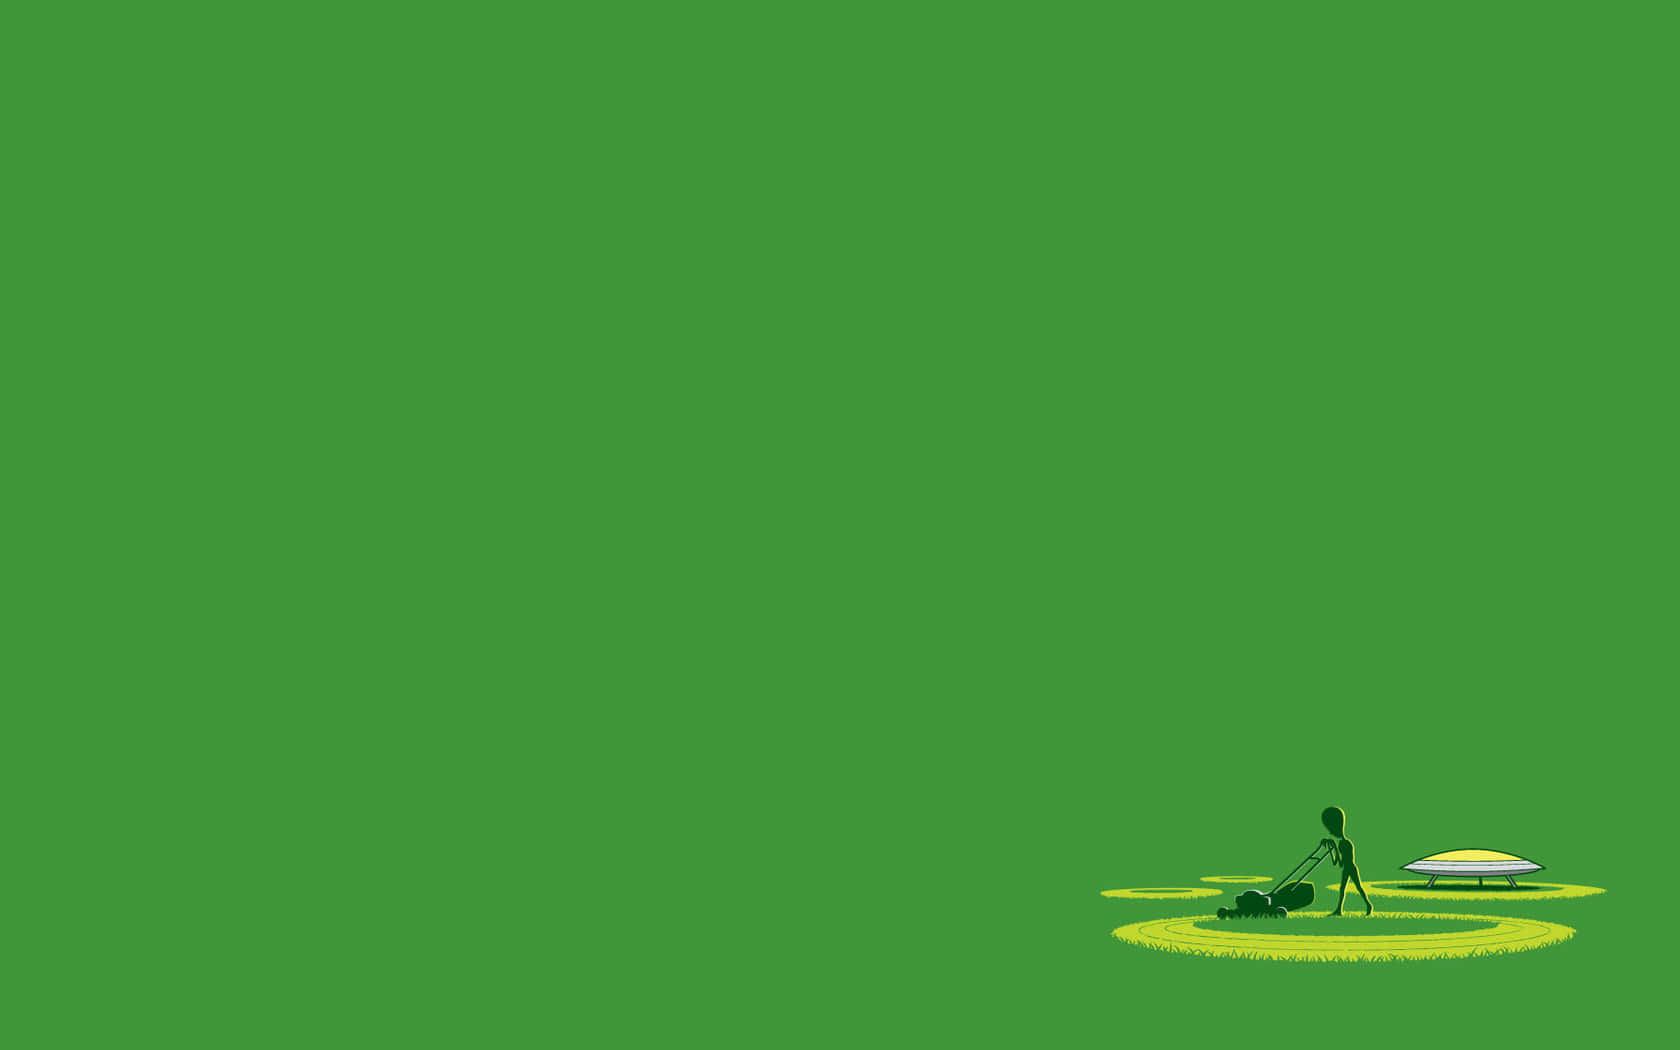 Funny Green Alien Mowing Background